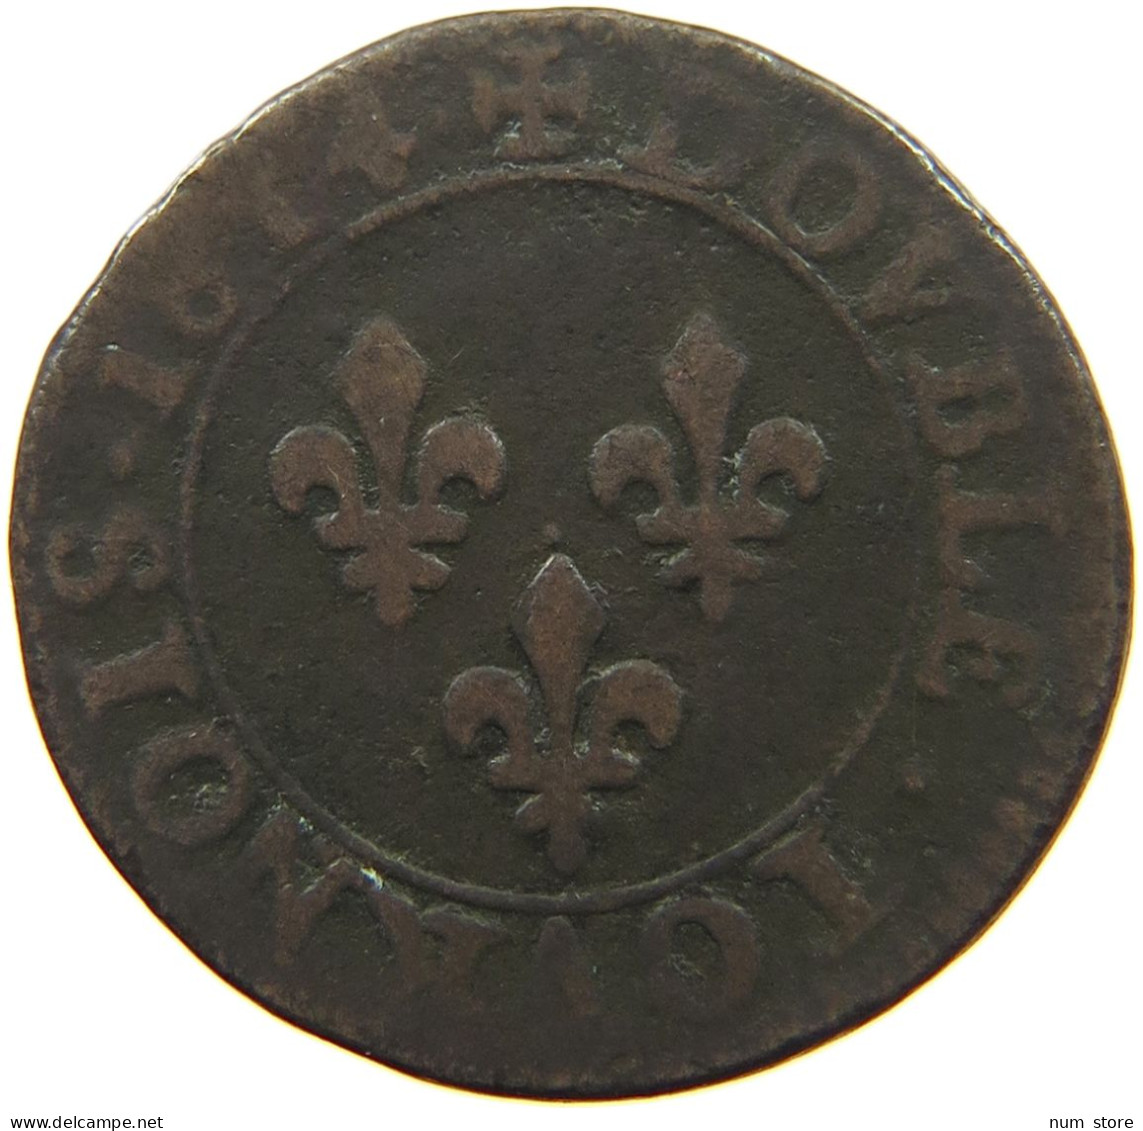 FRANCE DOUBLE TOURNOIS 1614 LOUIS XIII #MA 001673 - 1610-1643 Louis XIII The Just